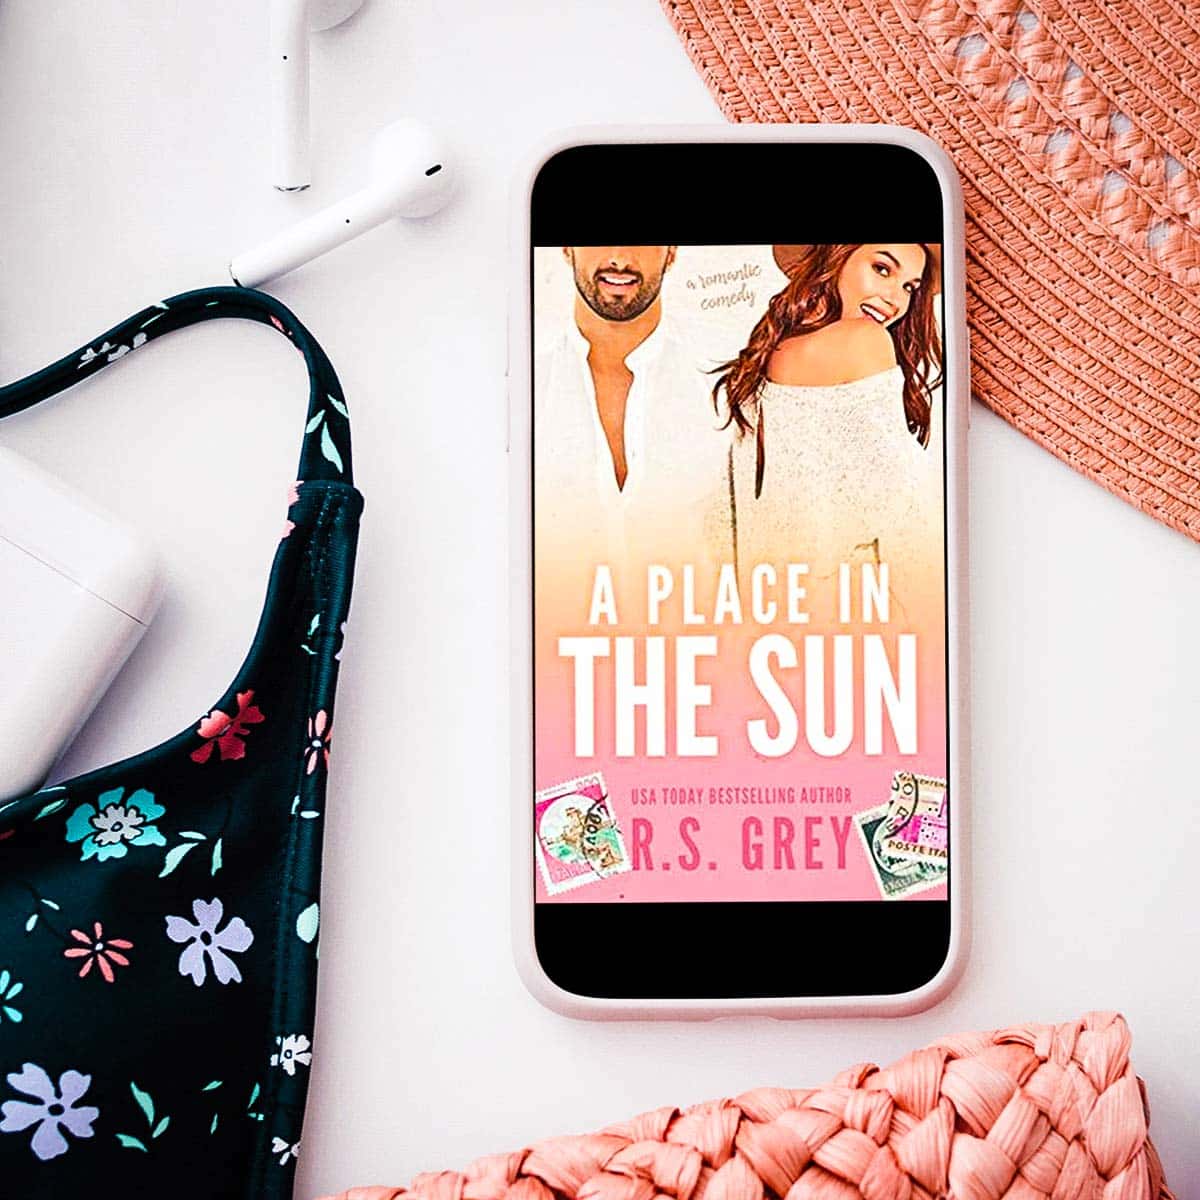 Set in Italy, A Place in the Sun by RS Grey is a vacation romance that combines humor and heart to tell a story about self-discovery and finding happiness!